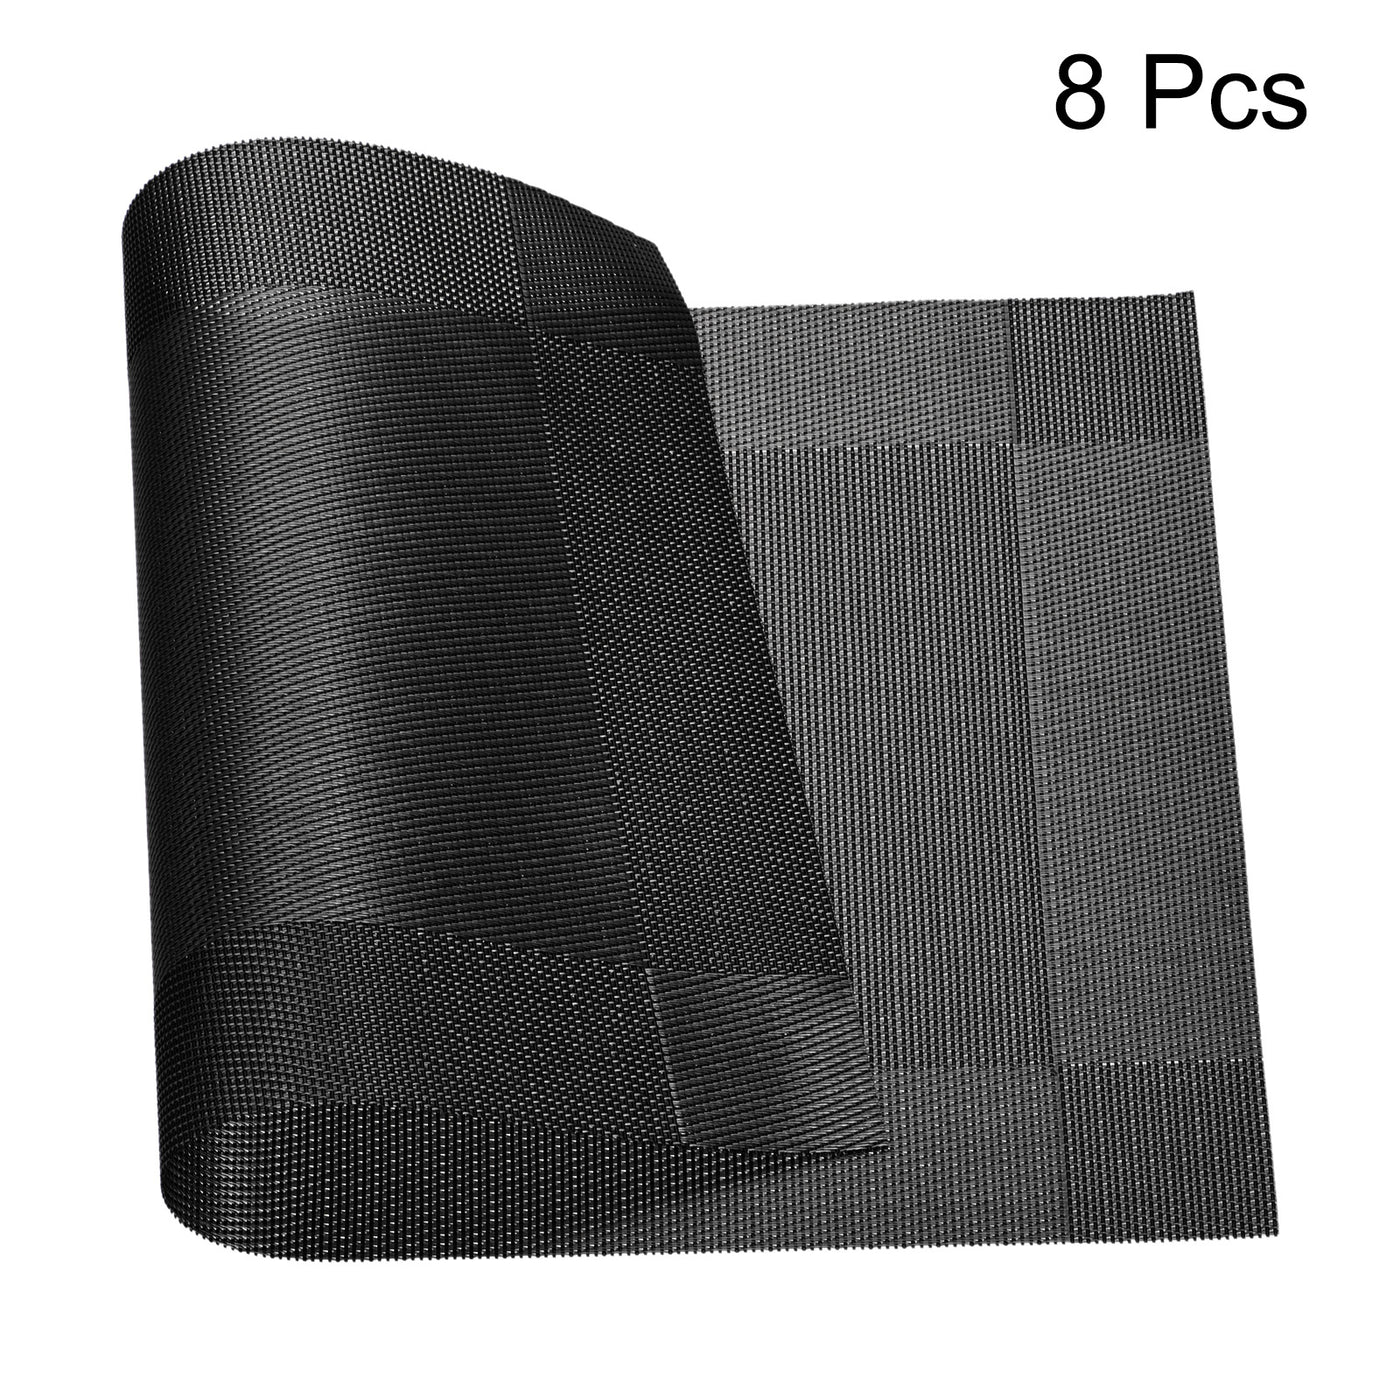 uxcell Uxcell Place Mats 450x300mm 8pcs PVC Table Washable Woven Placemat, Black Gray